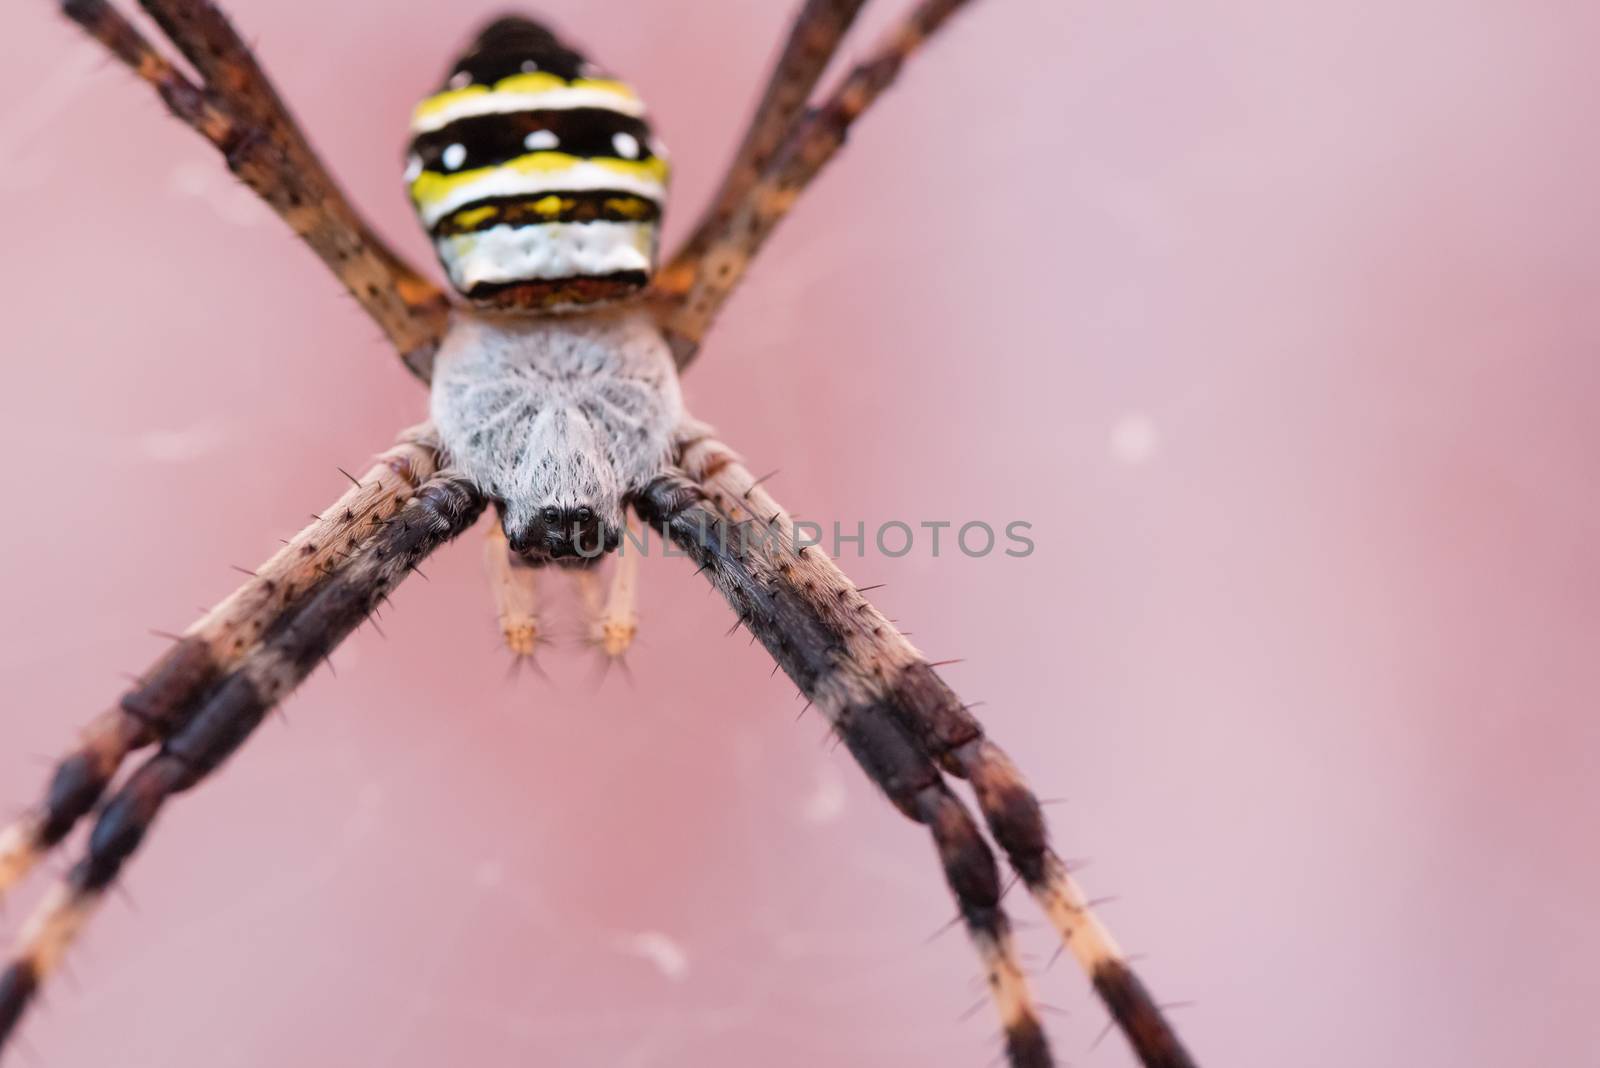 A macro shot of a black and yellow garden spider.